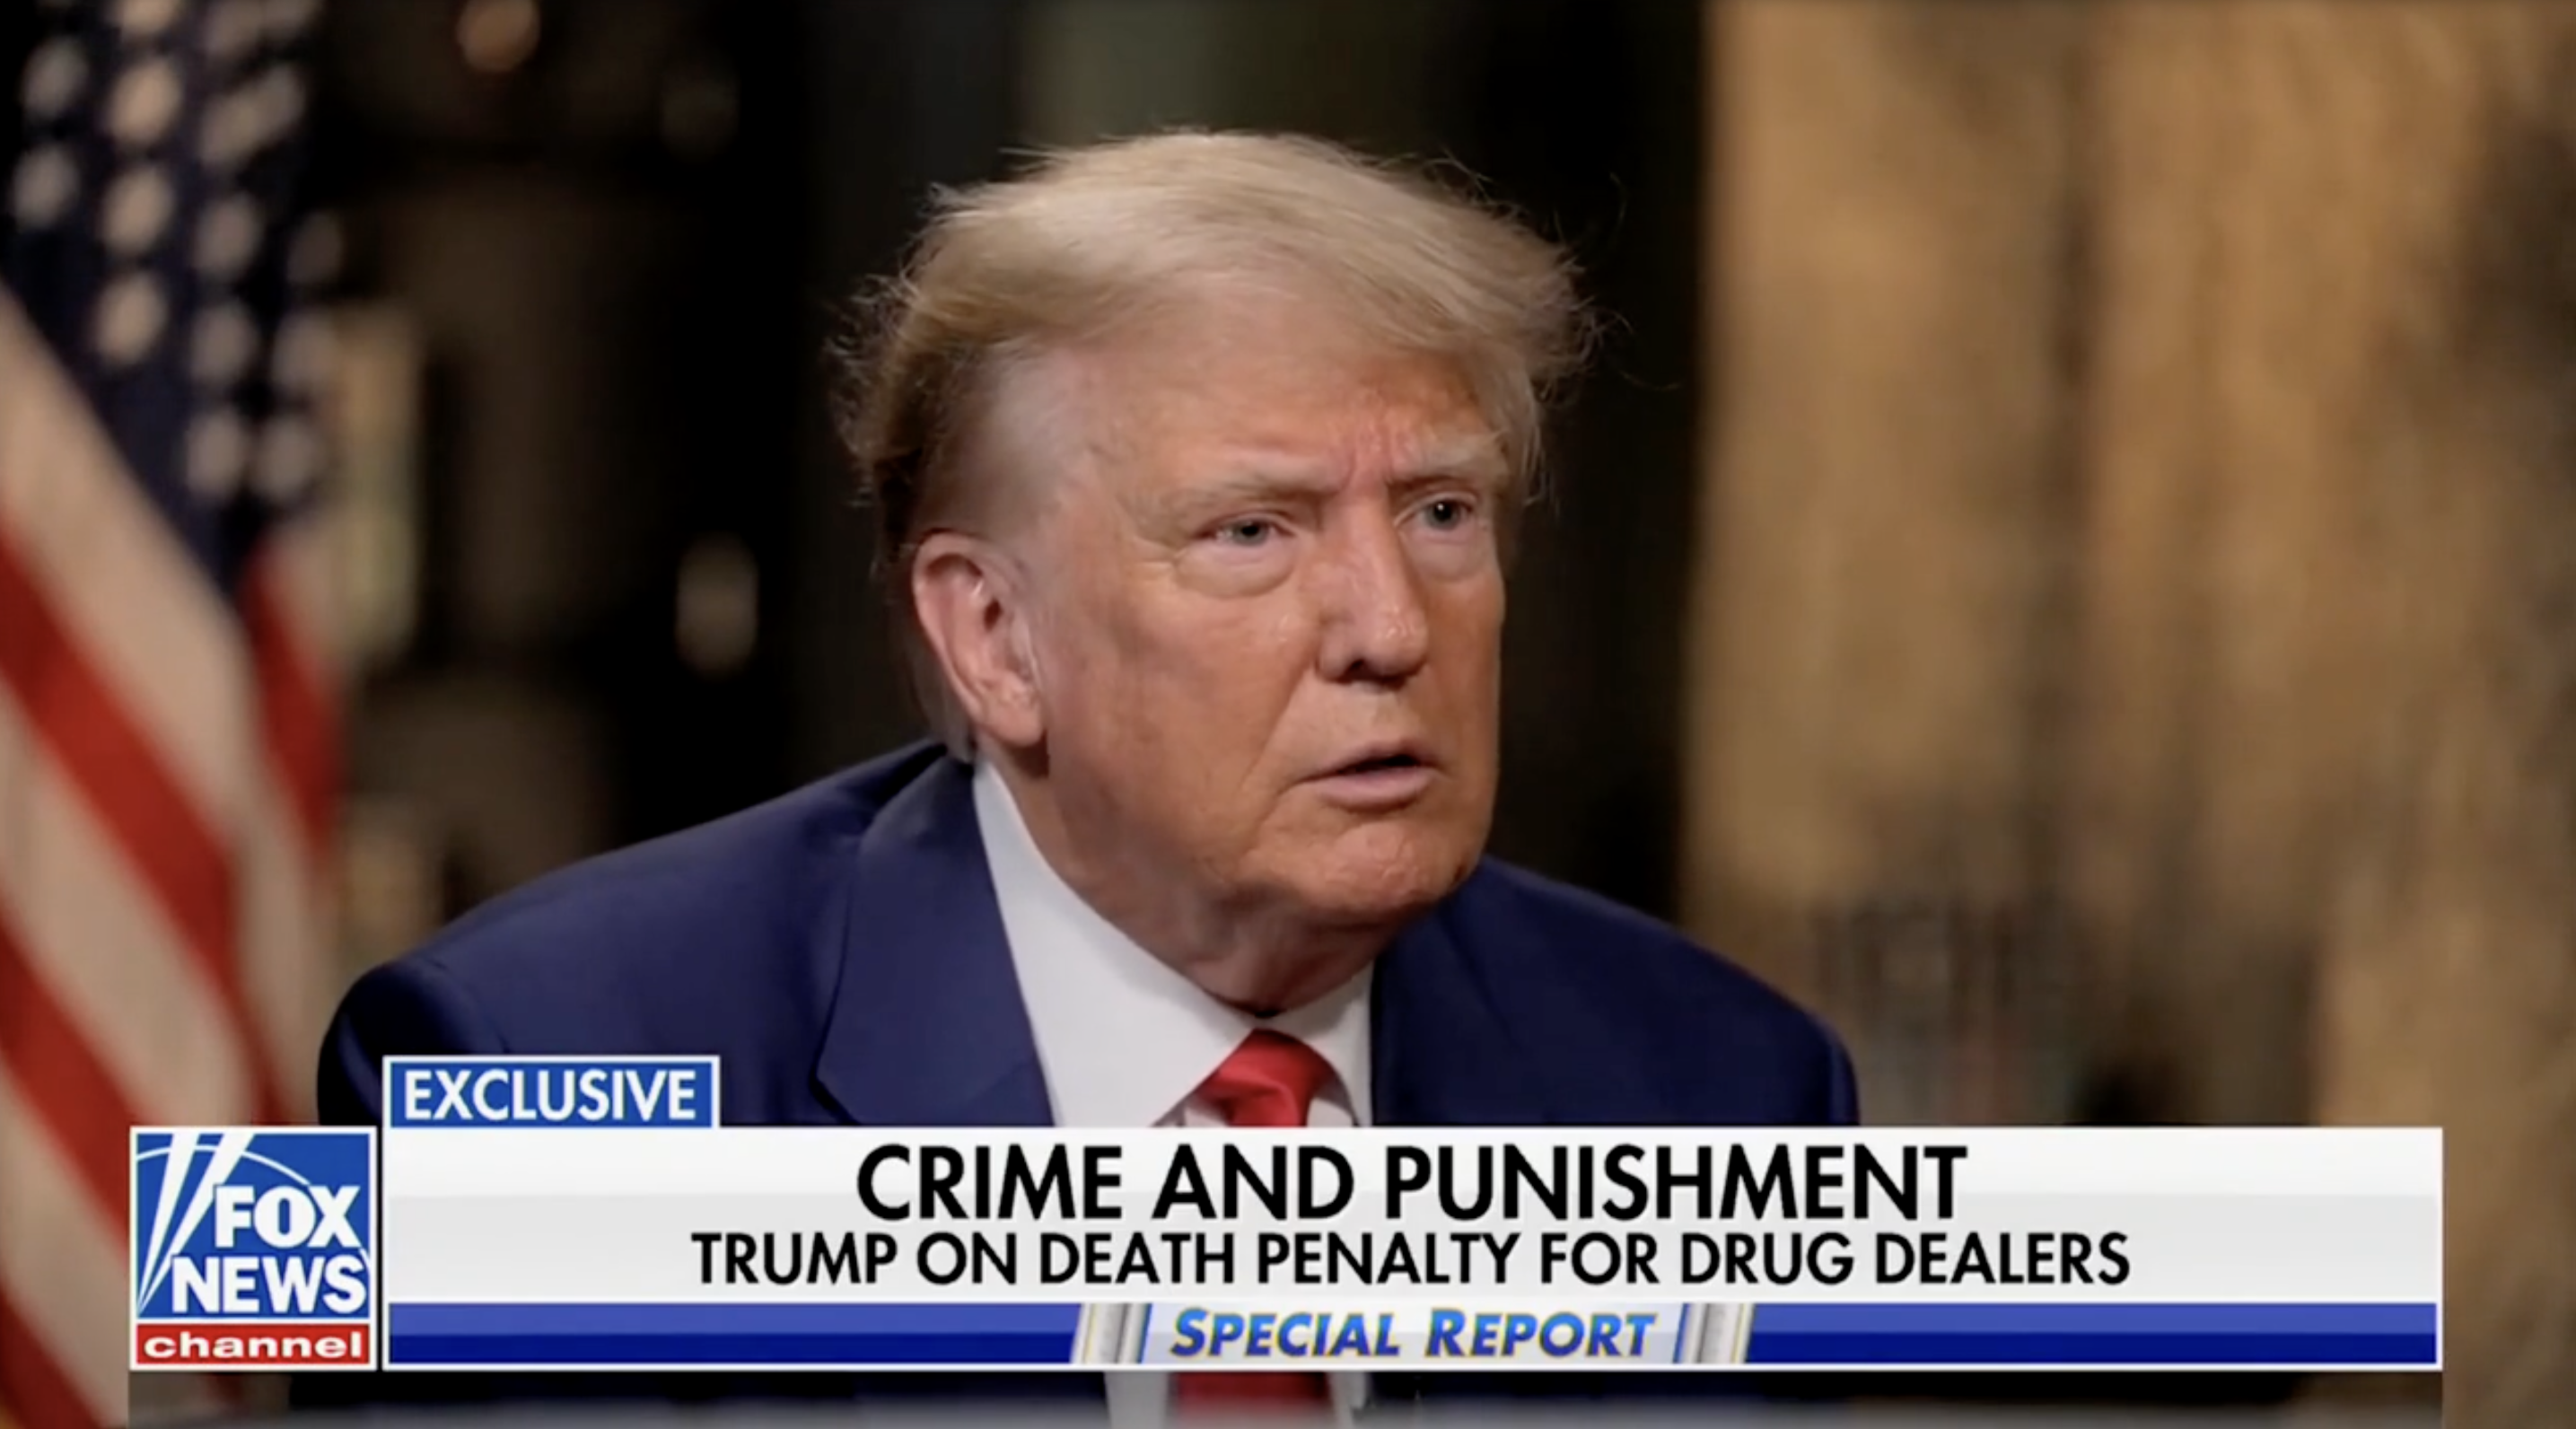 Trump questioned about supporting execution of drug dealers despite pardoning some and signing ‘First Step Act’.